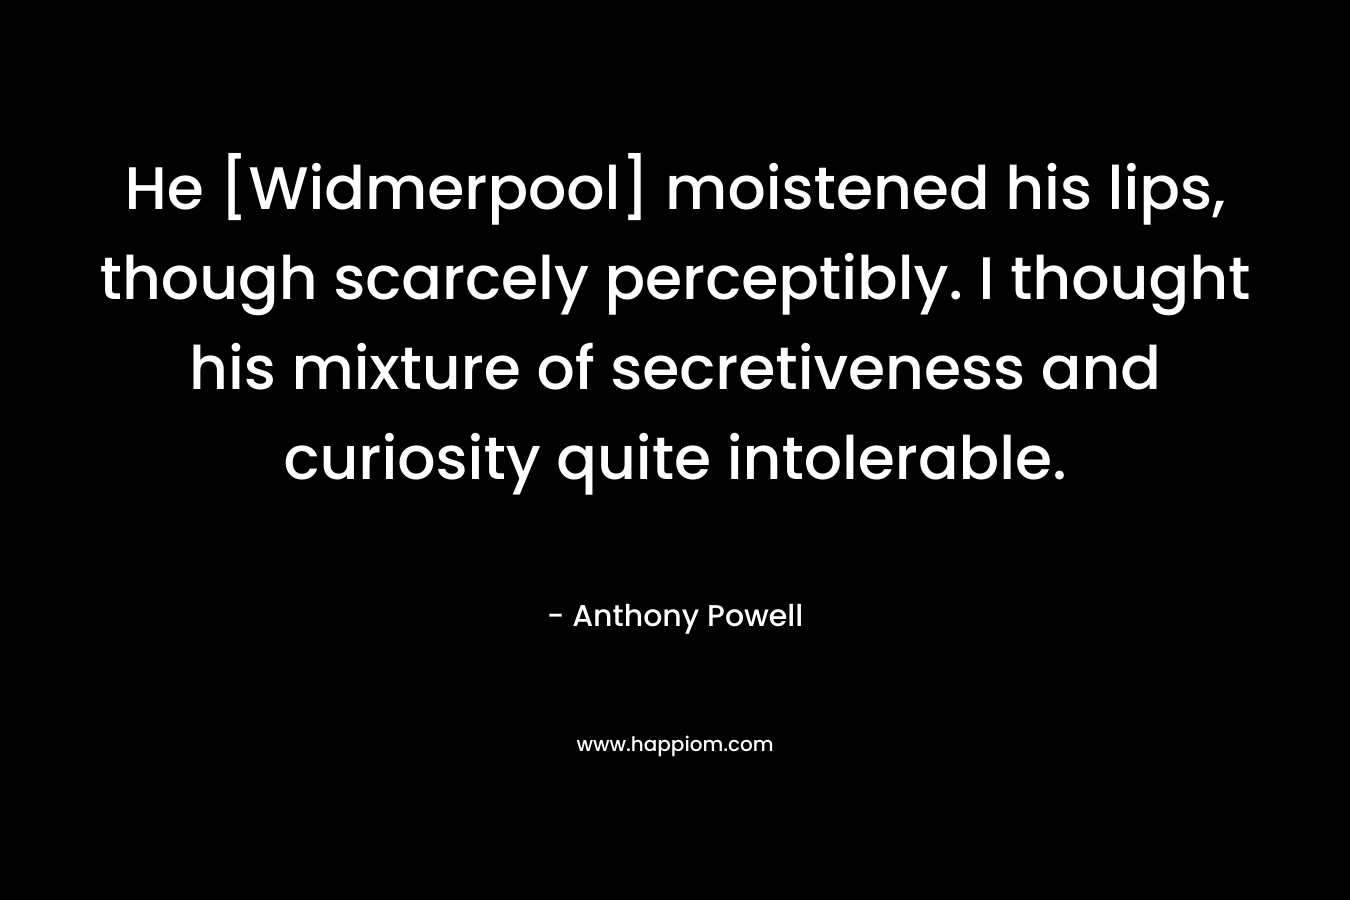 He [Widmerpool] moistened his lips, though scarcely perceptibly. I thought his mixture of secretiveness and curiosity quite intolerable. – Anthony Powell